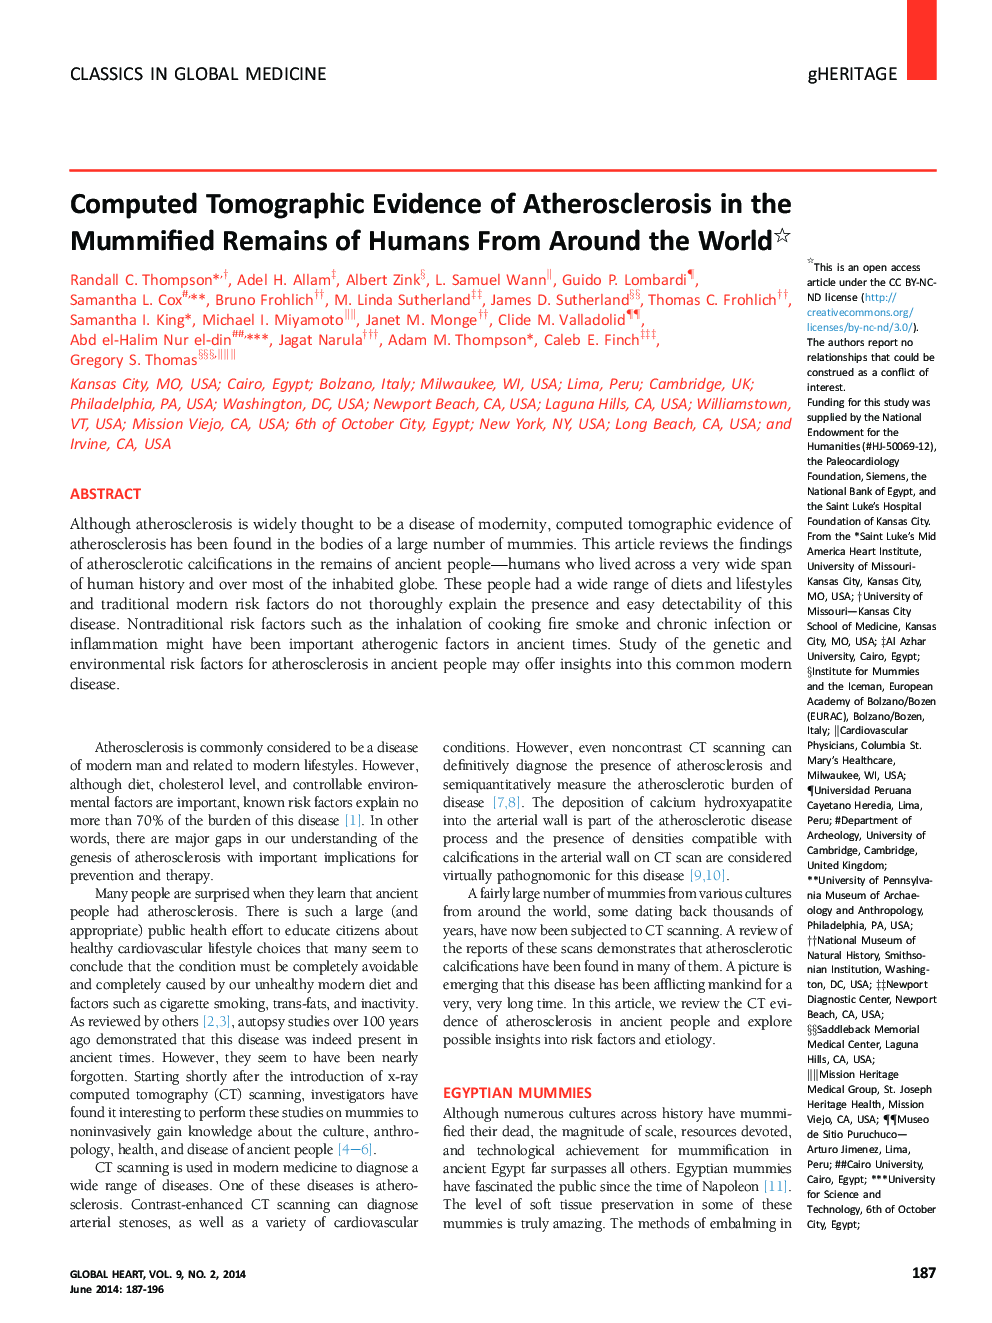 Computed Tomographic Evidence of Atherosclerosis in the Mummified Remains of Humans From Around the World